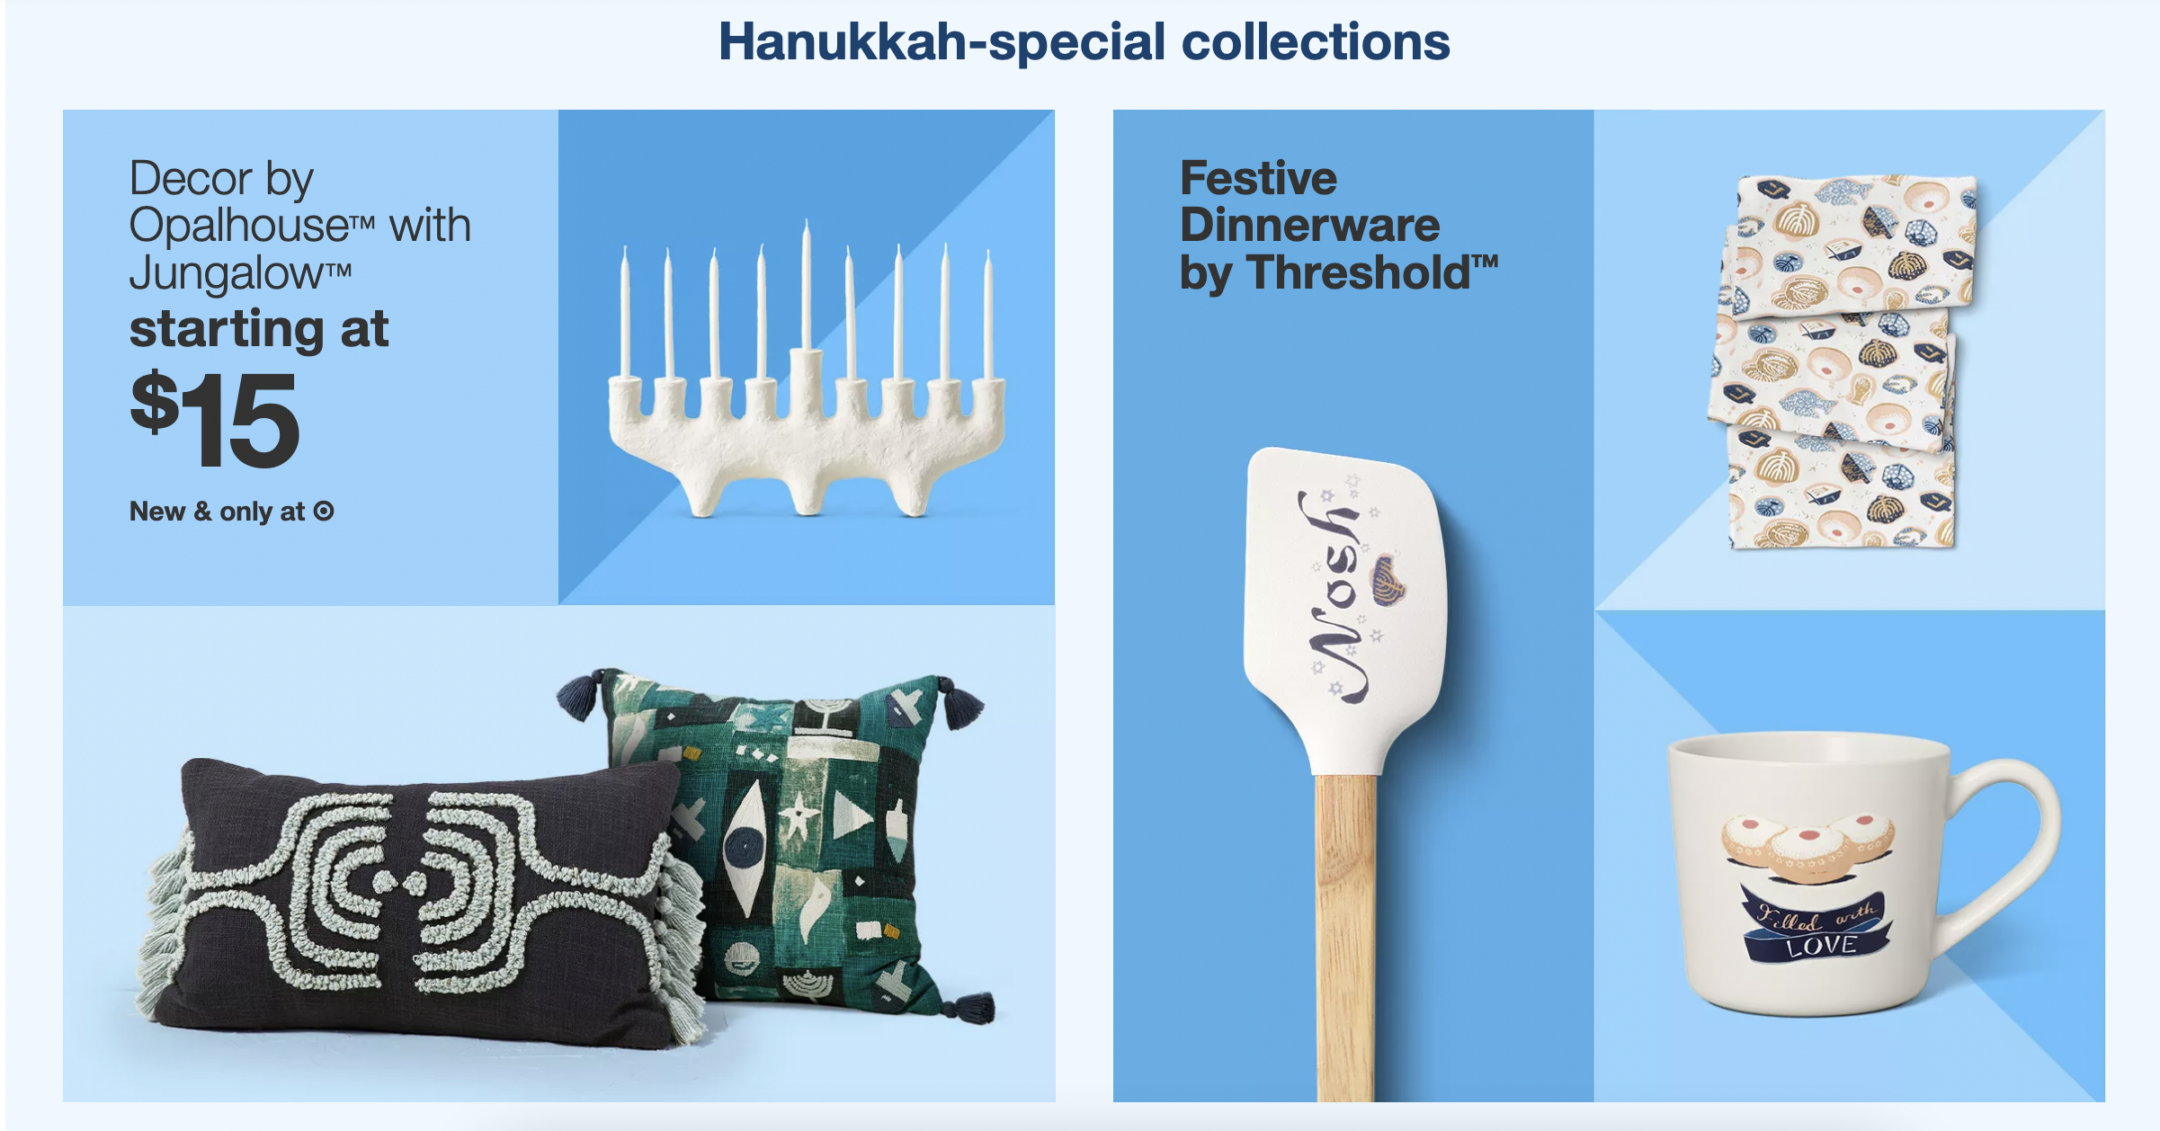 Target’s website prominent promotes Hanukkah products, including from a house brand by a Jewish creator named Justina Blakeney. (Screenshot)